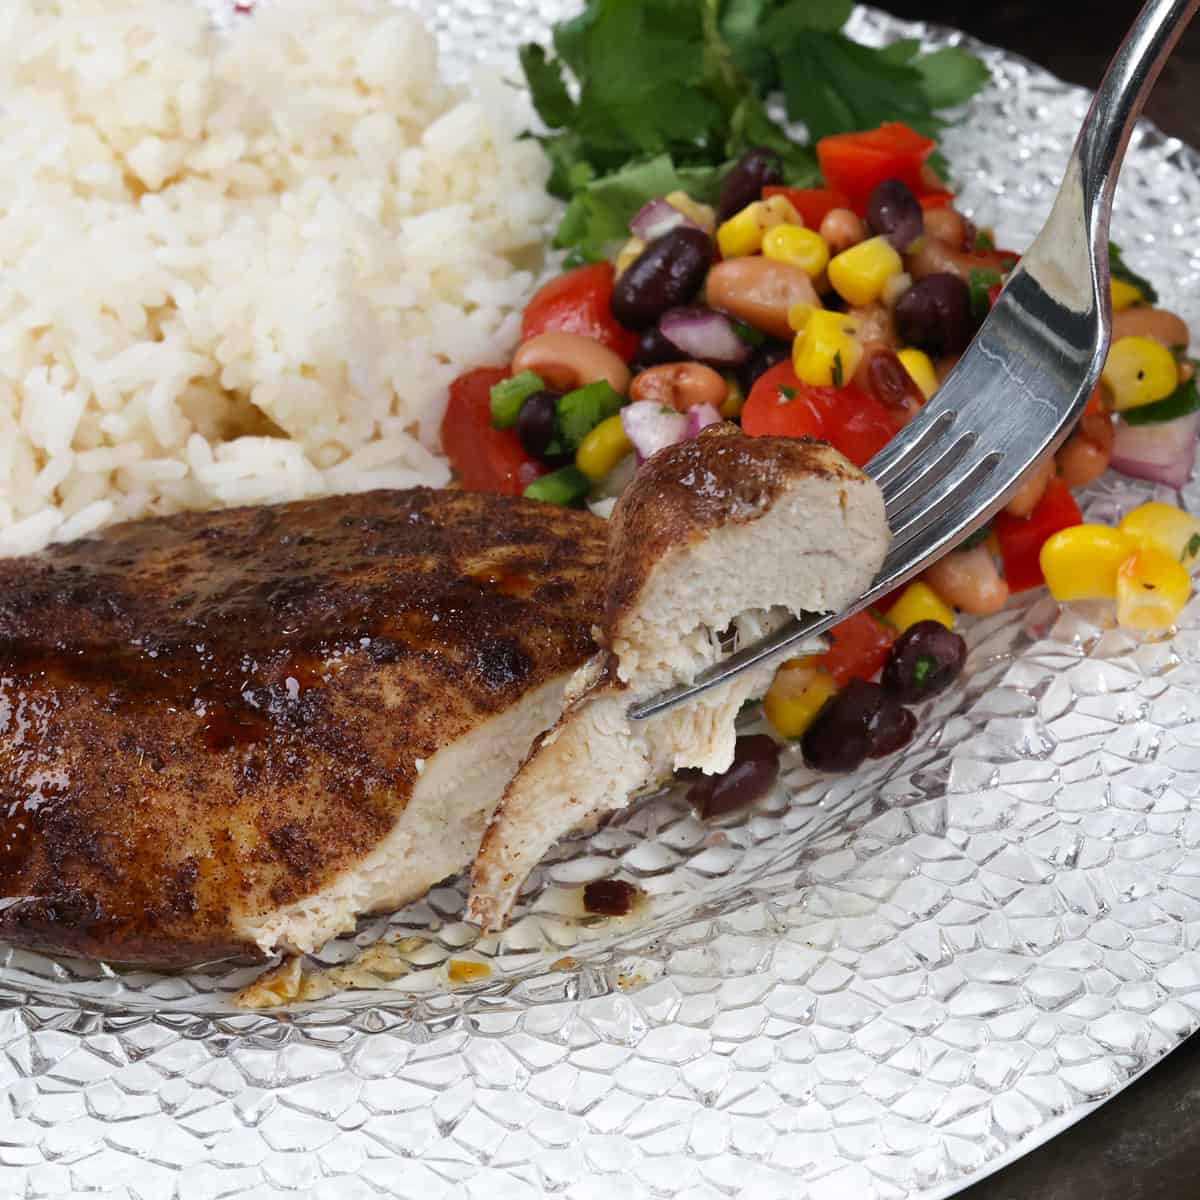 sliced jerk chicken on a plate with white rice and corn salad on the side.